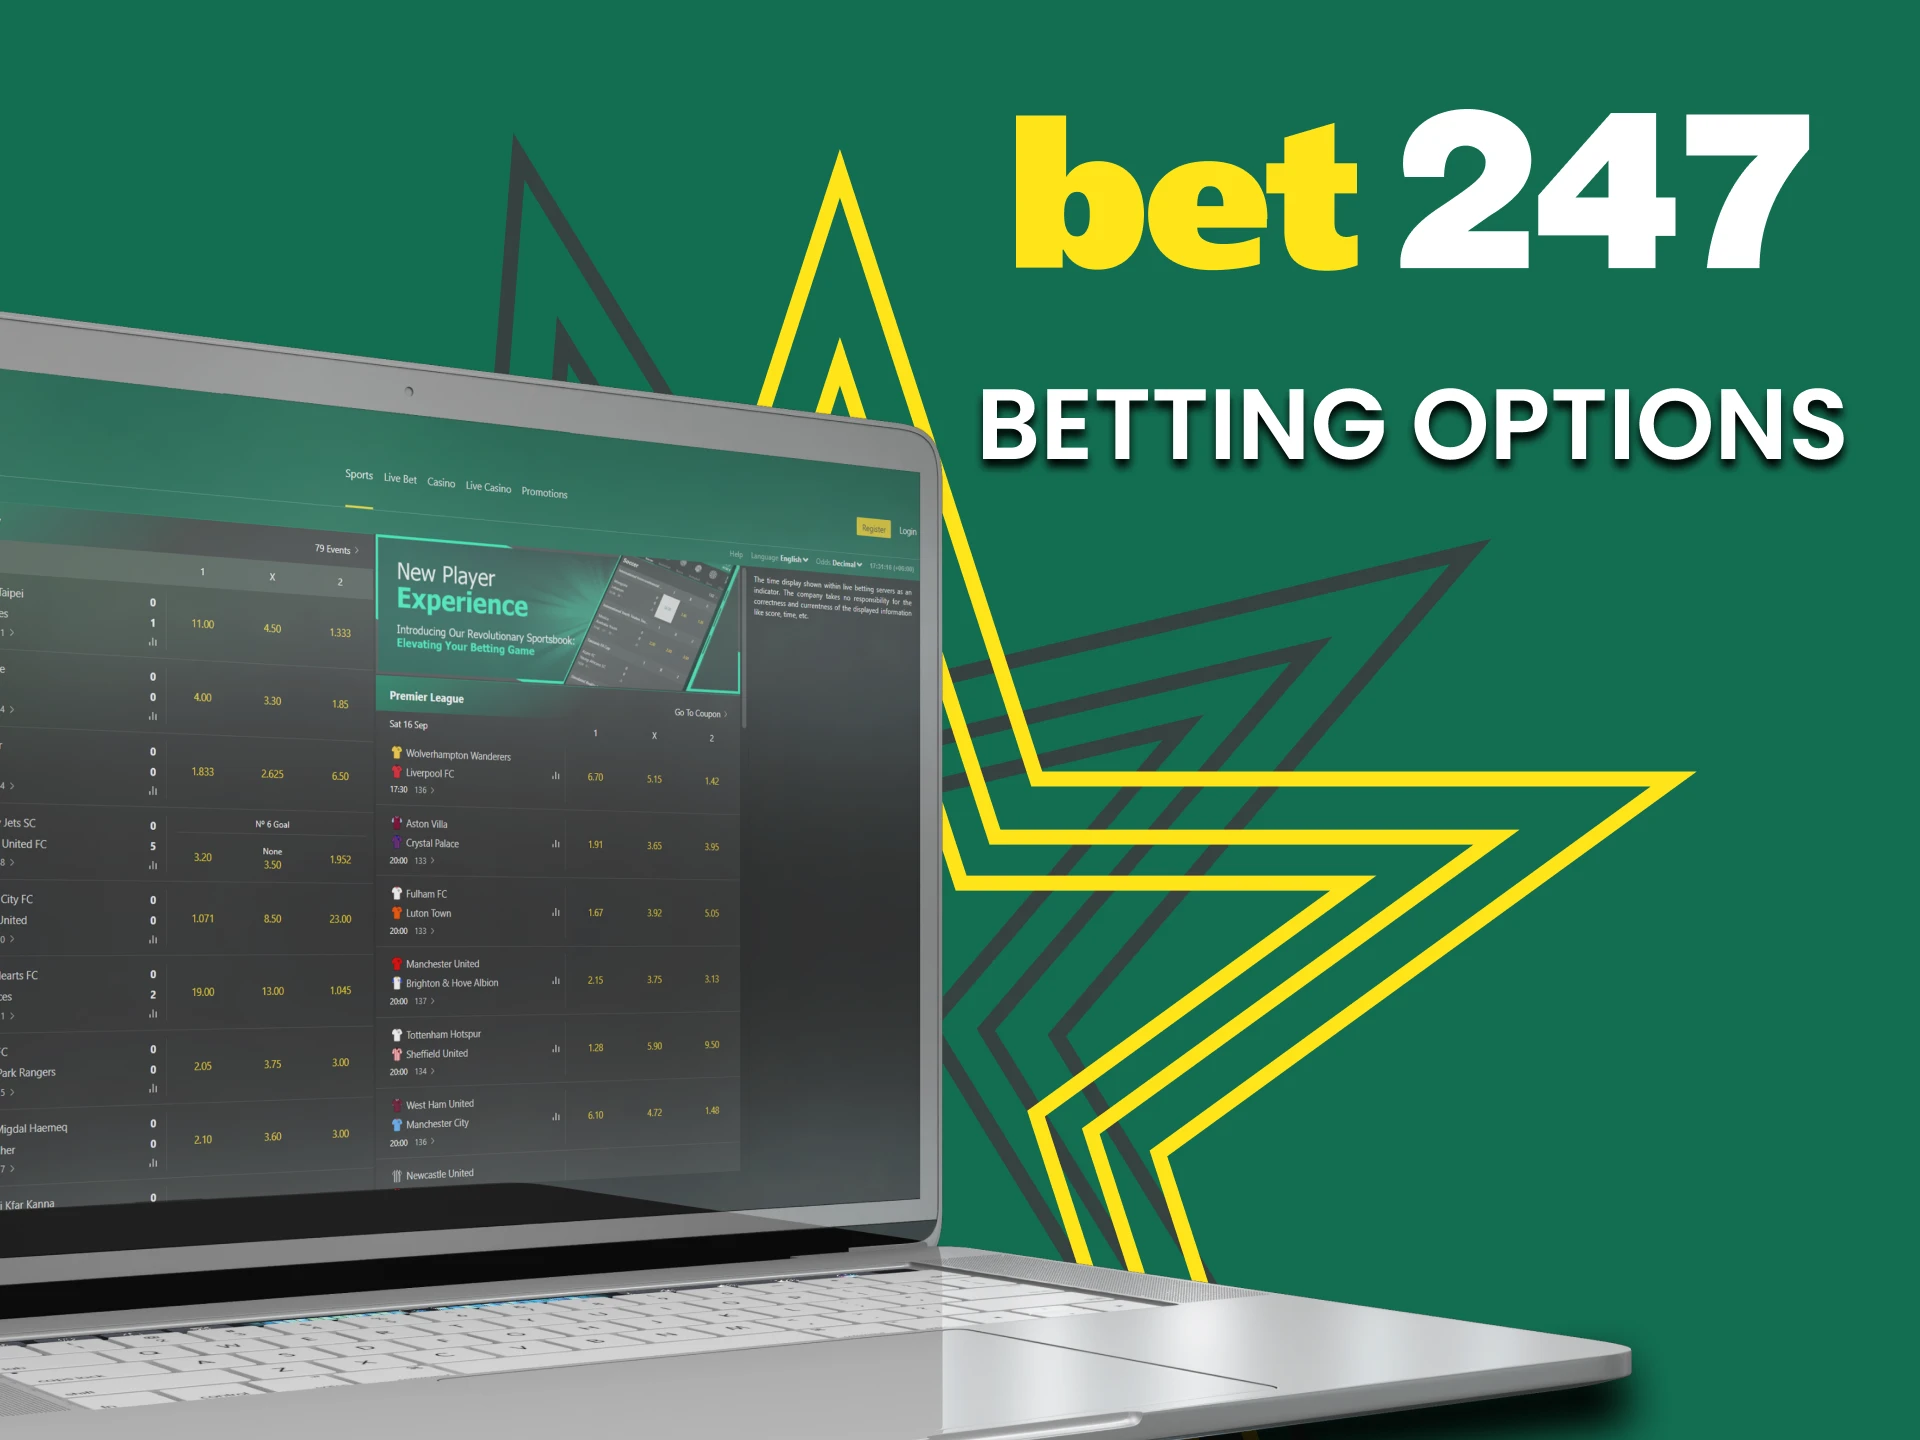 With Bet247 try the best betting options.